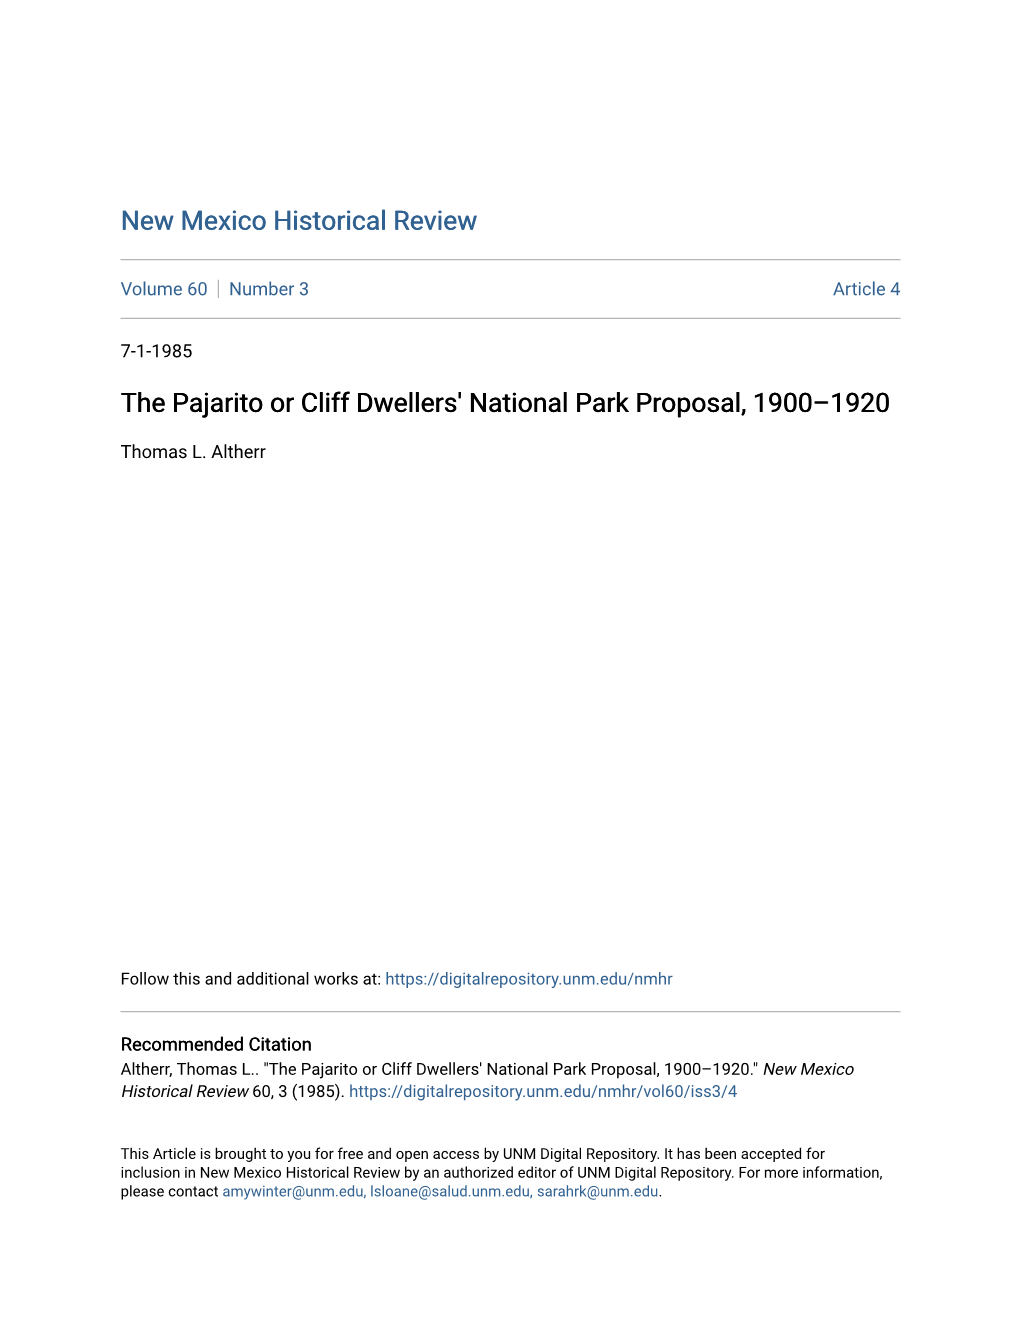 The Pajarito Or Cliff Dwellers' National Park Proposal, 1900-1920